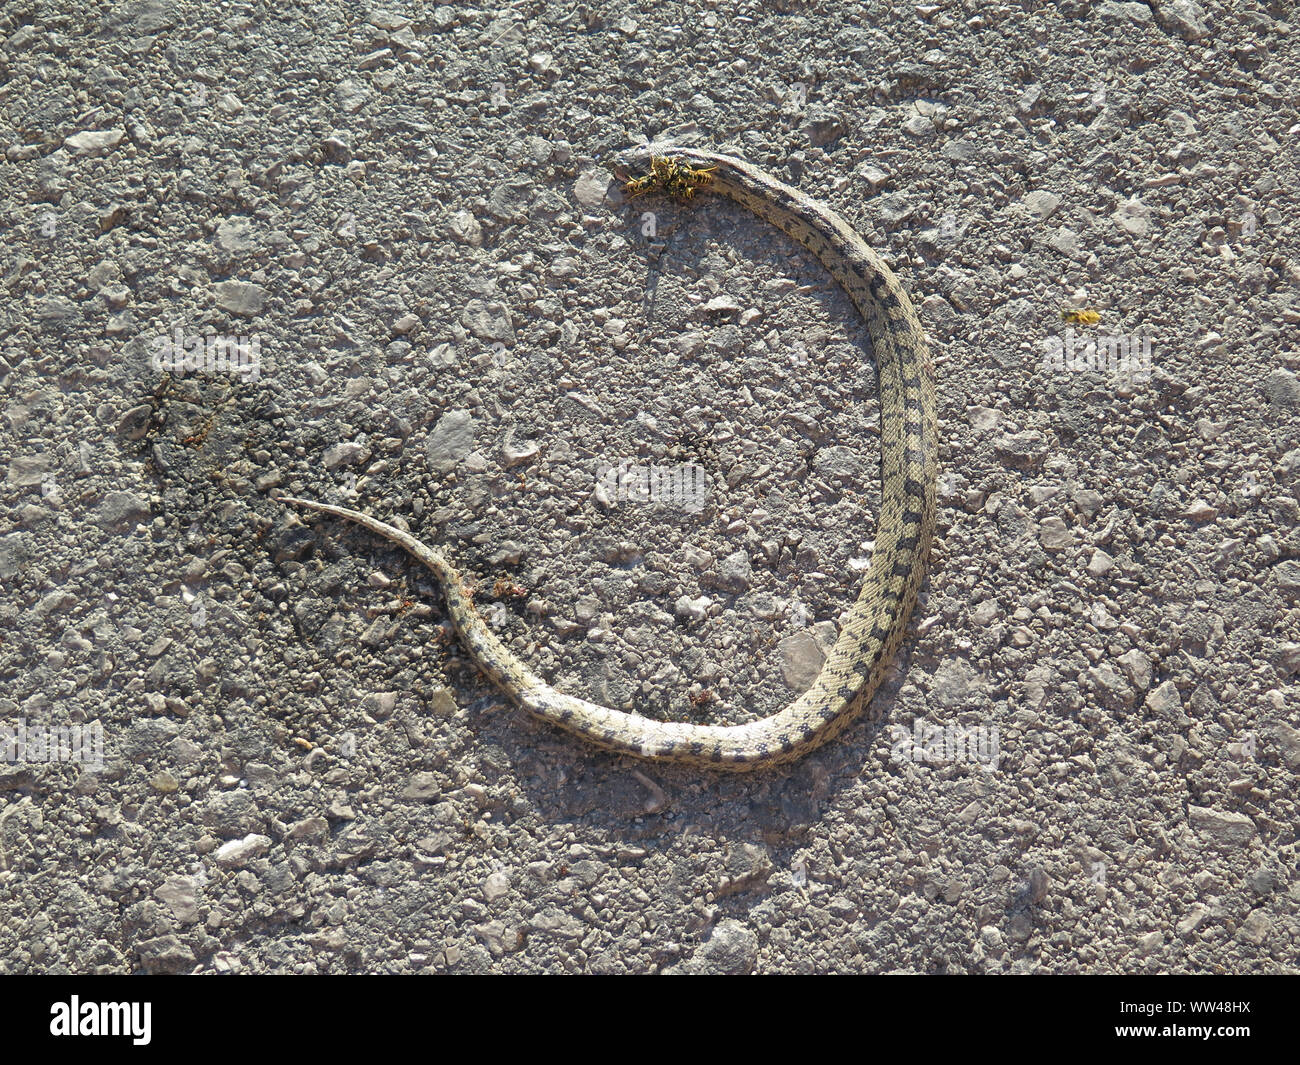 Wasps eating away at dead Snake in rural Andalusian countryside, Spain Stock Photo